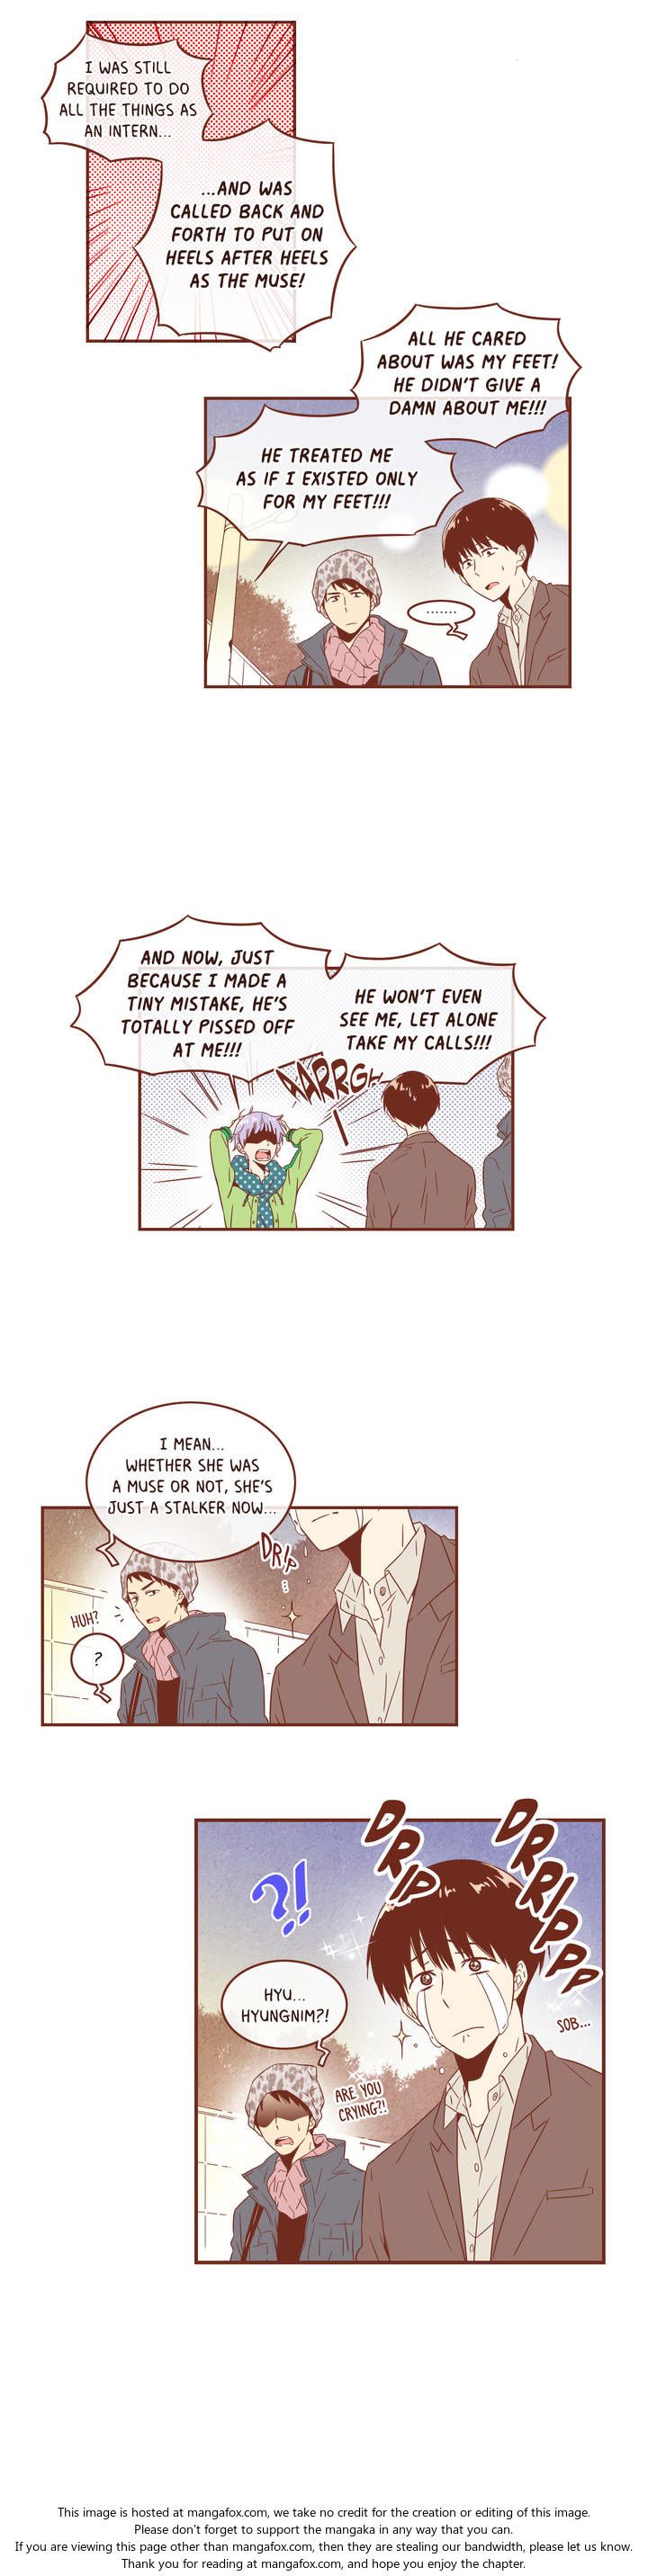 Why Did Men Stop Wearing High Heels? Chapter 020 page 8